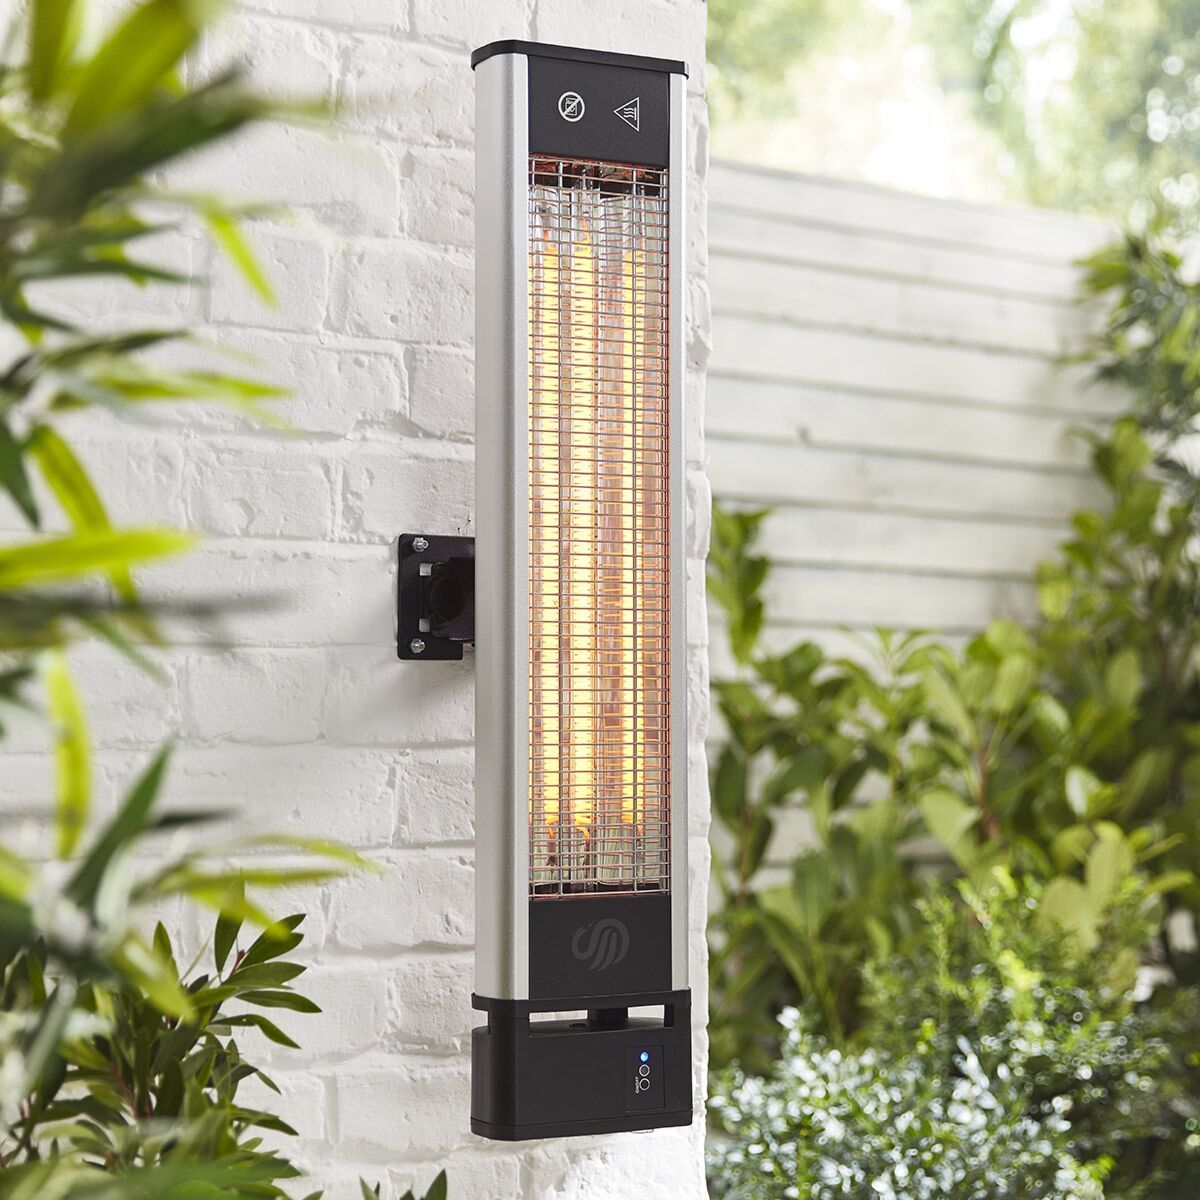 Best Patio Heaters To In The Uk For 2021 - 2kw Electric Quartz Infrared Patio Heater